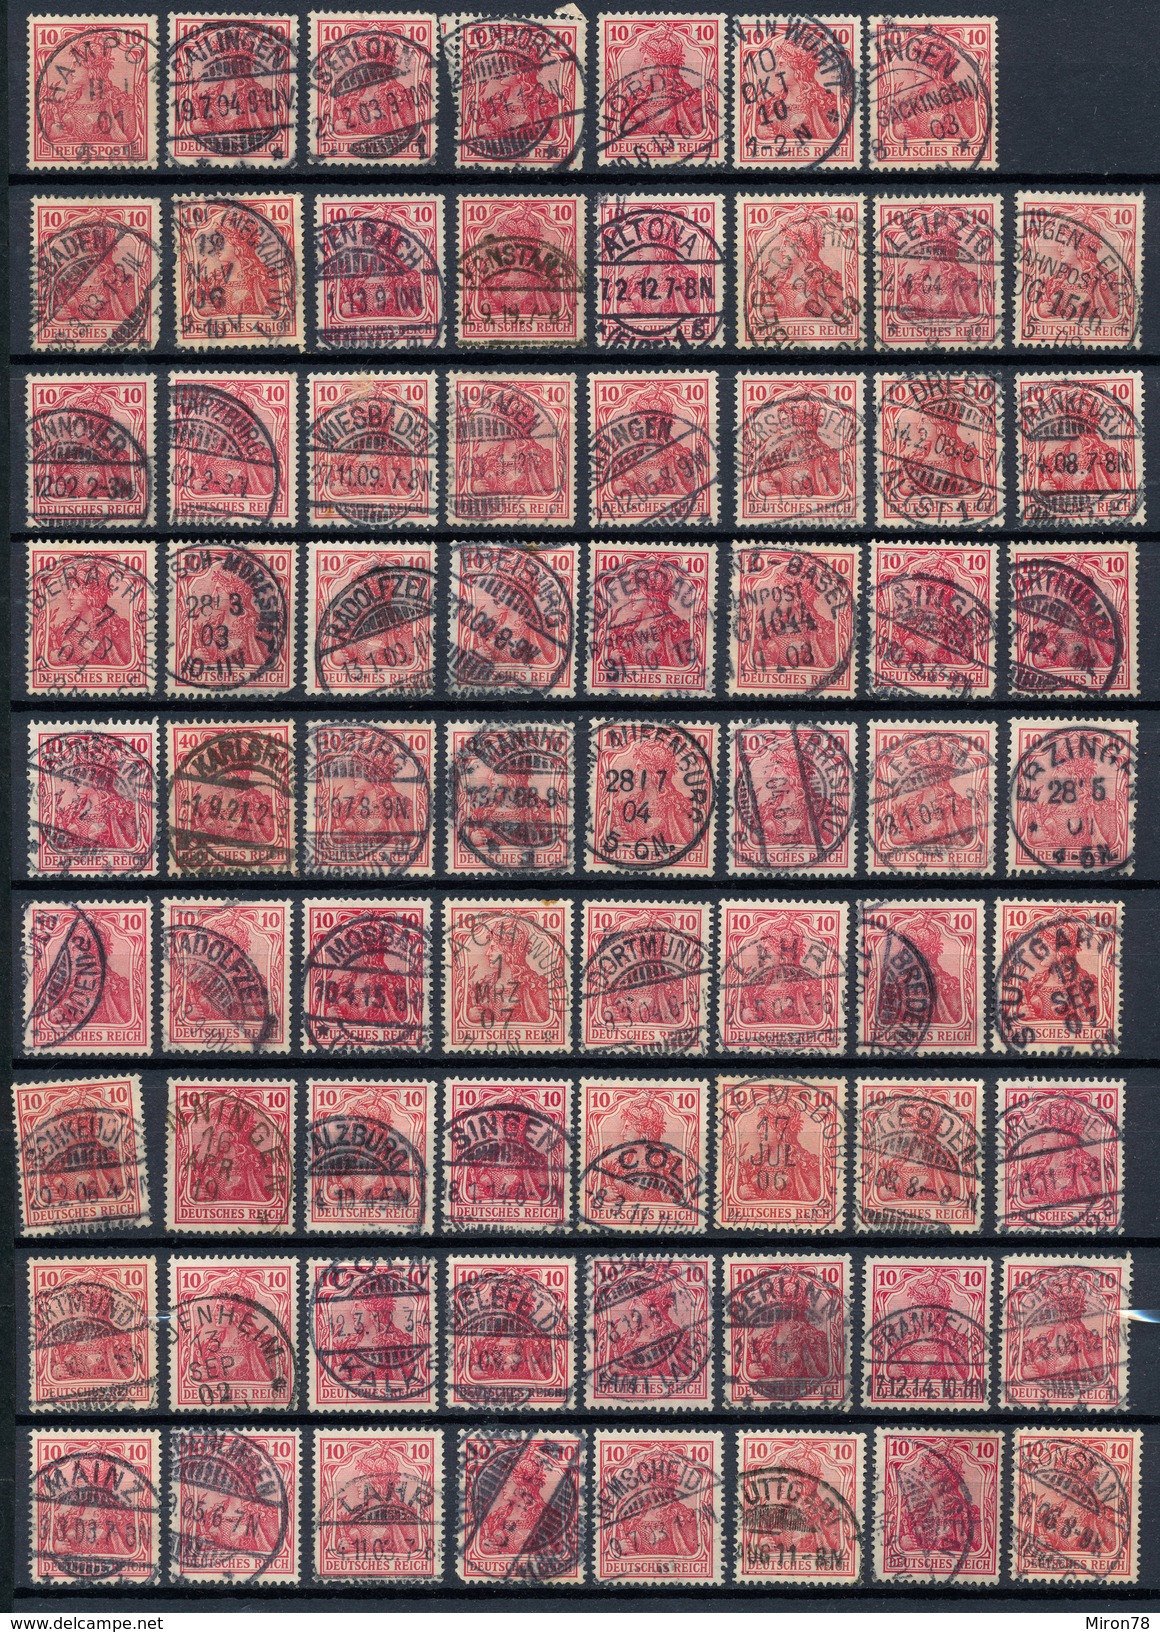 Stamps Germany 1902-1916? Fancy Cancel Used Lot#11 - Used Stamps